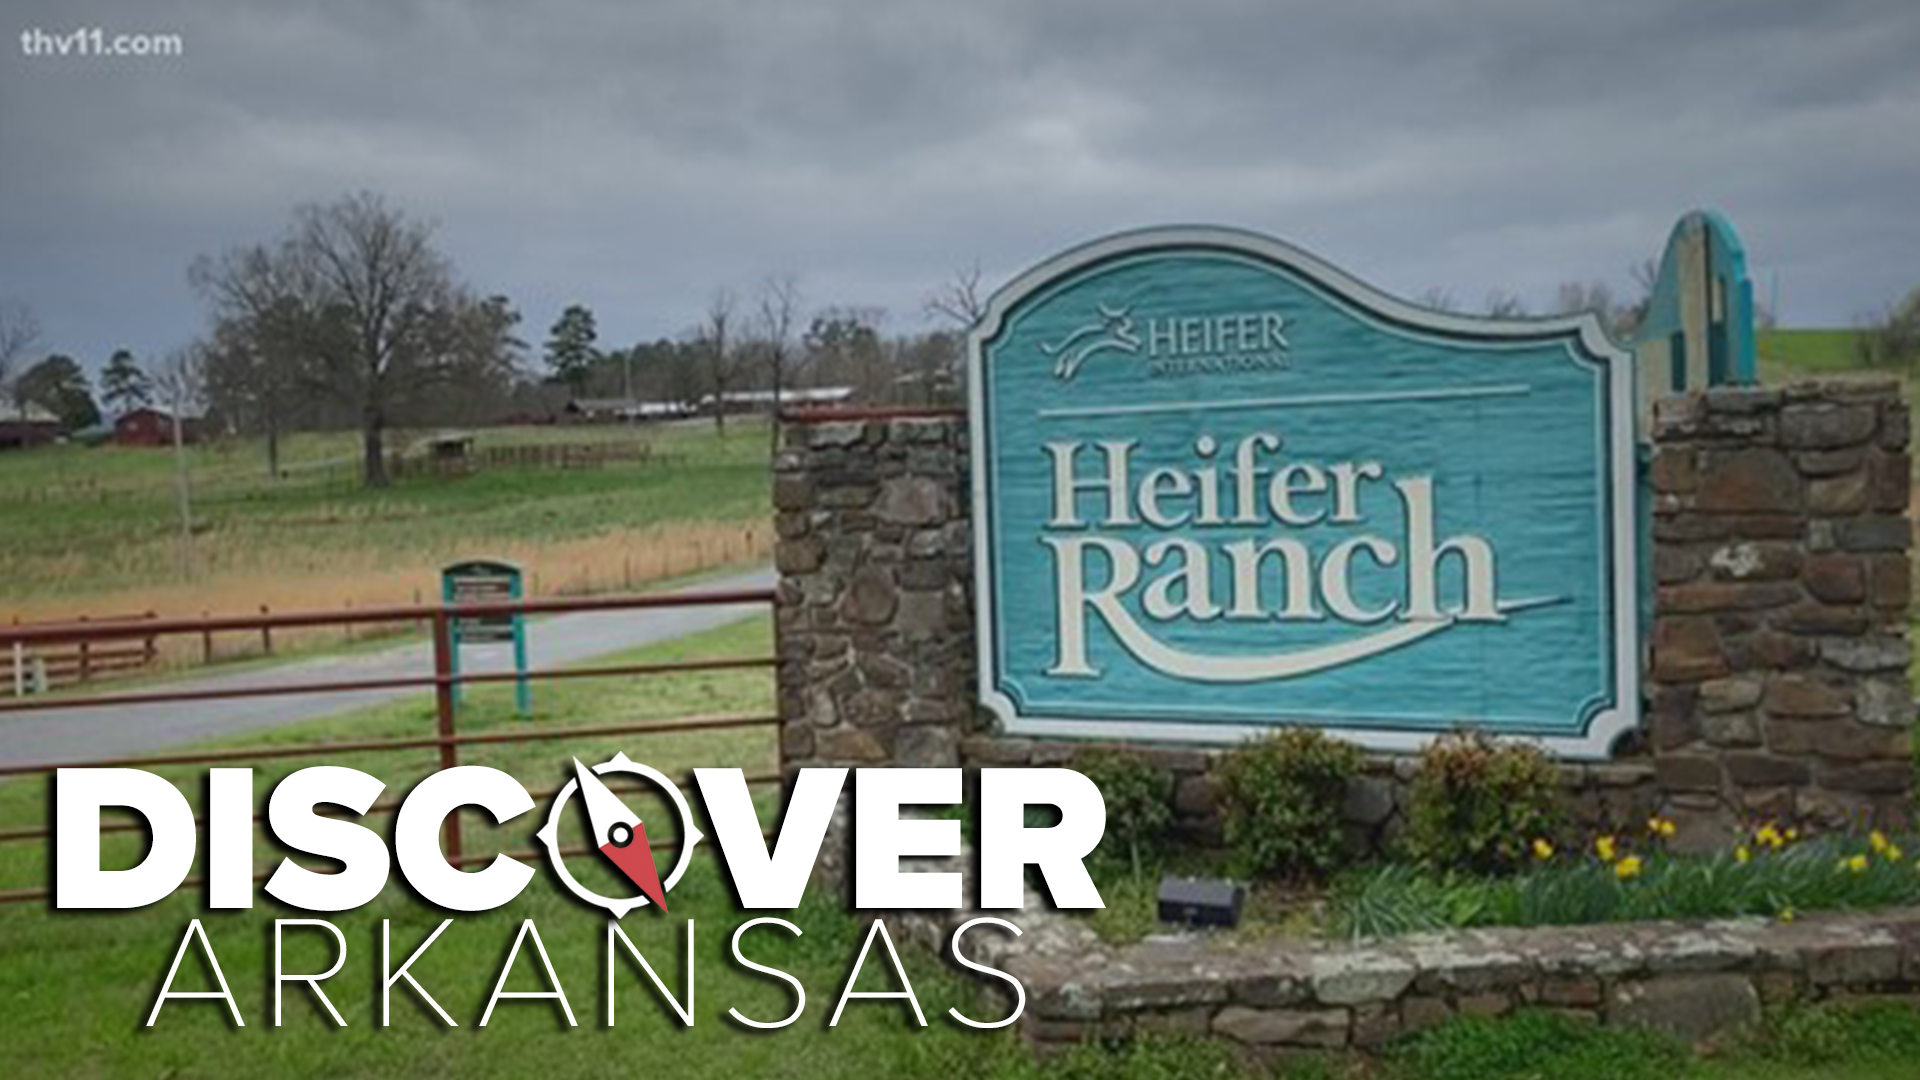 We're headed to a place - whose mission is to improve food security and nutrition across the globe, and one of its houses is right here in Arkansas.